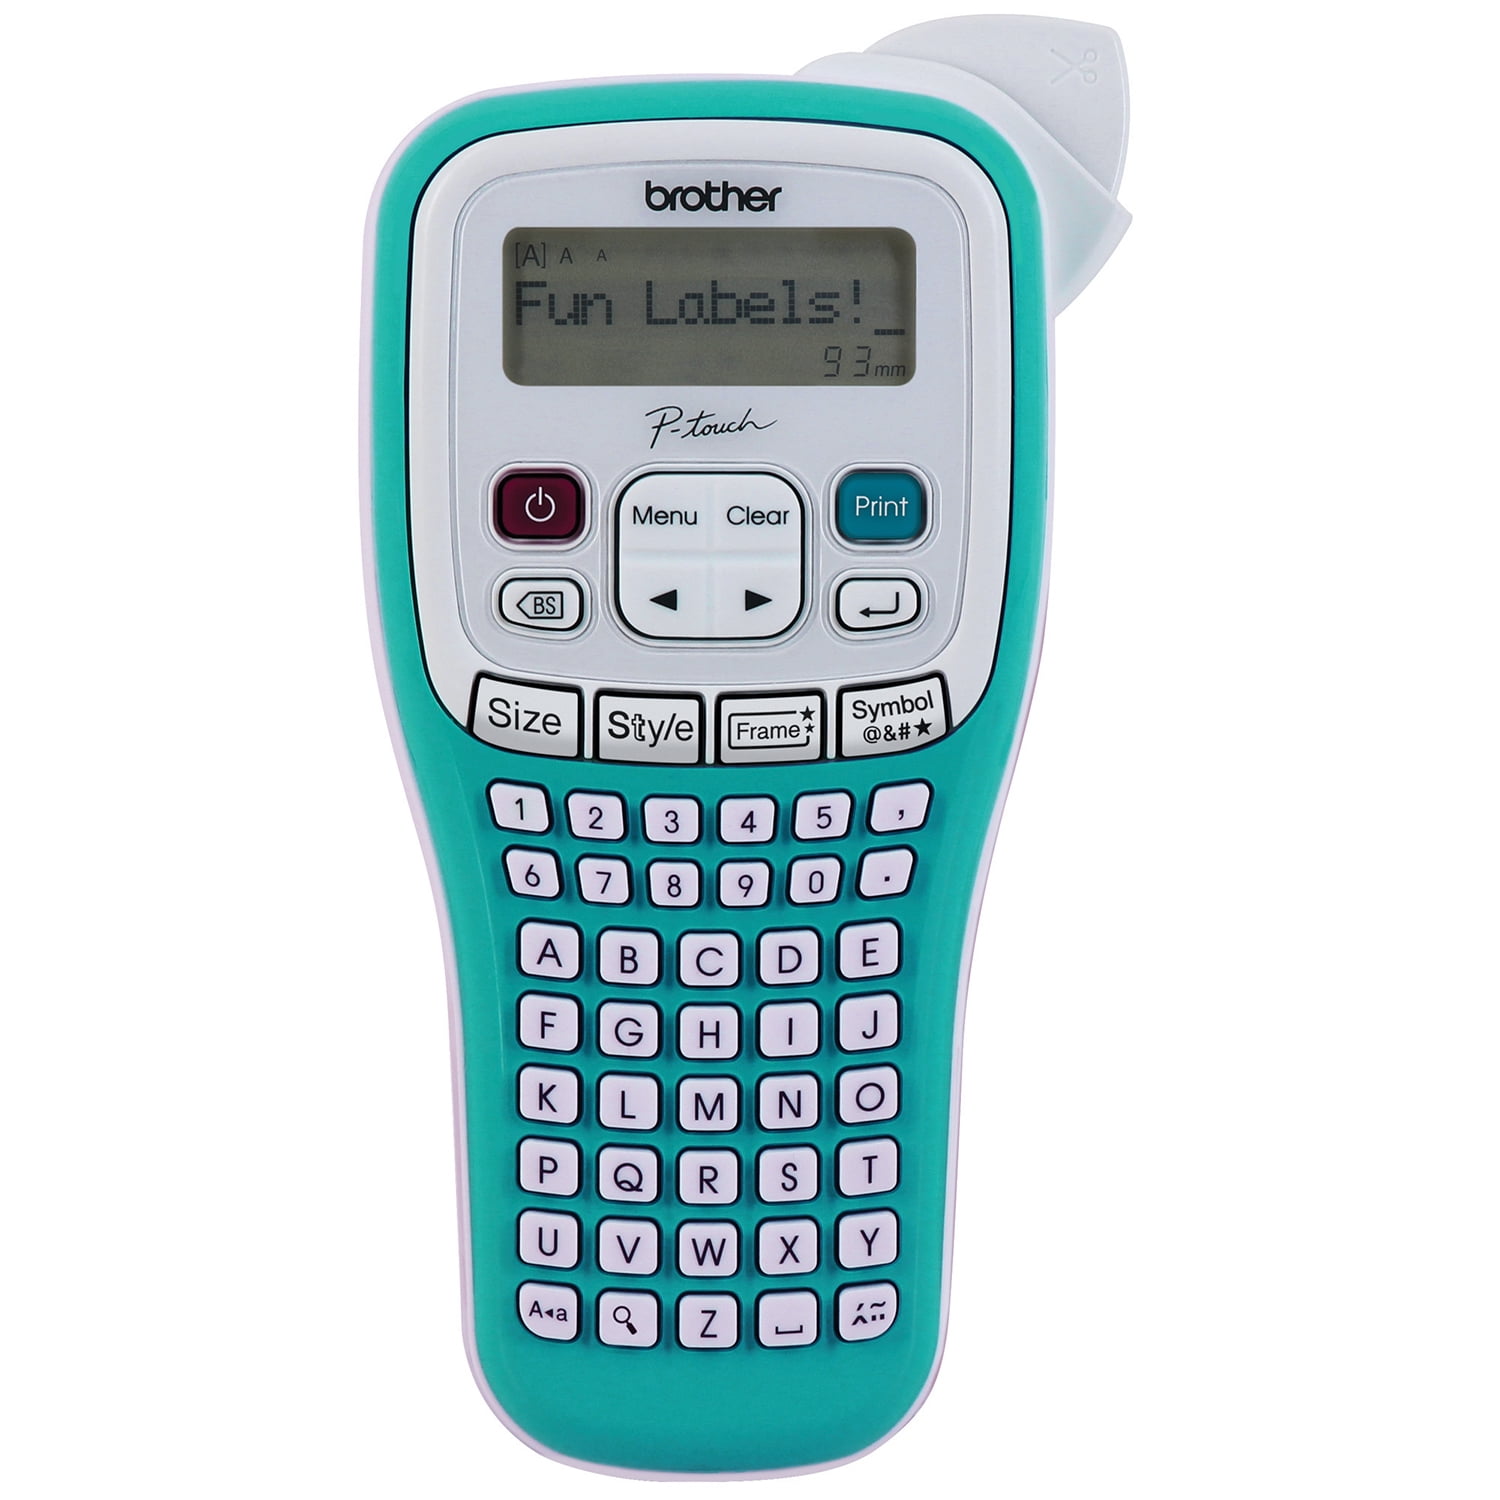 9 Things to Label with a Label Maker